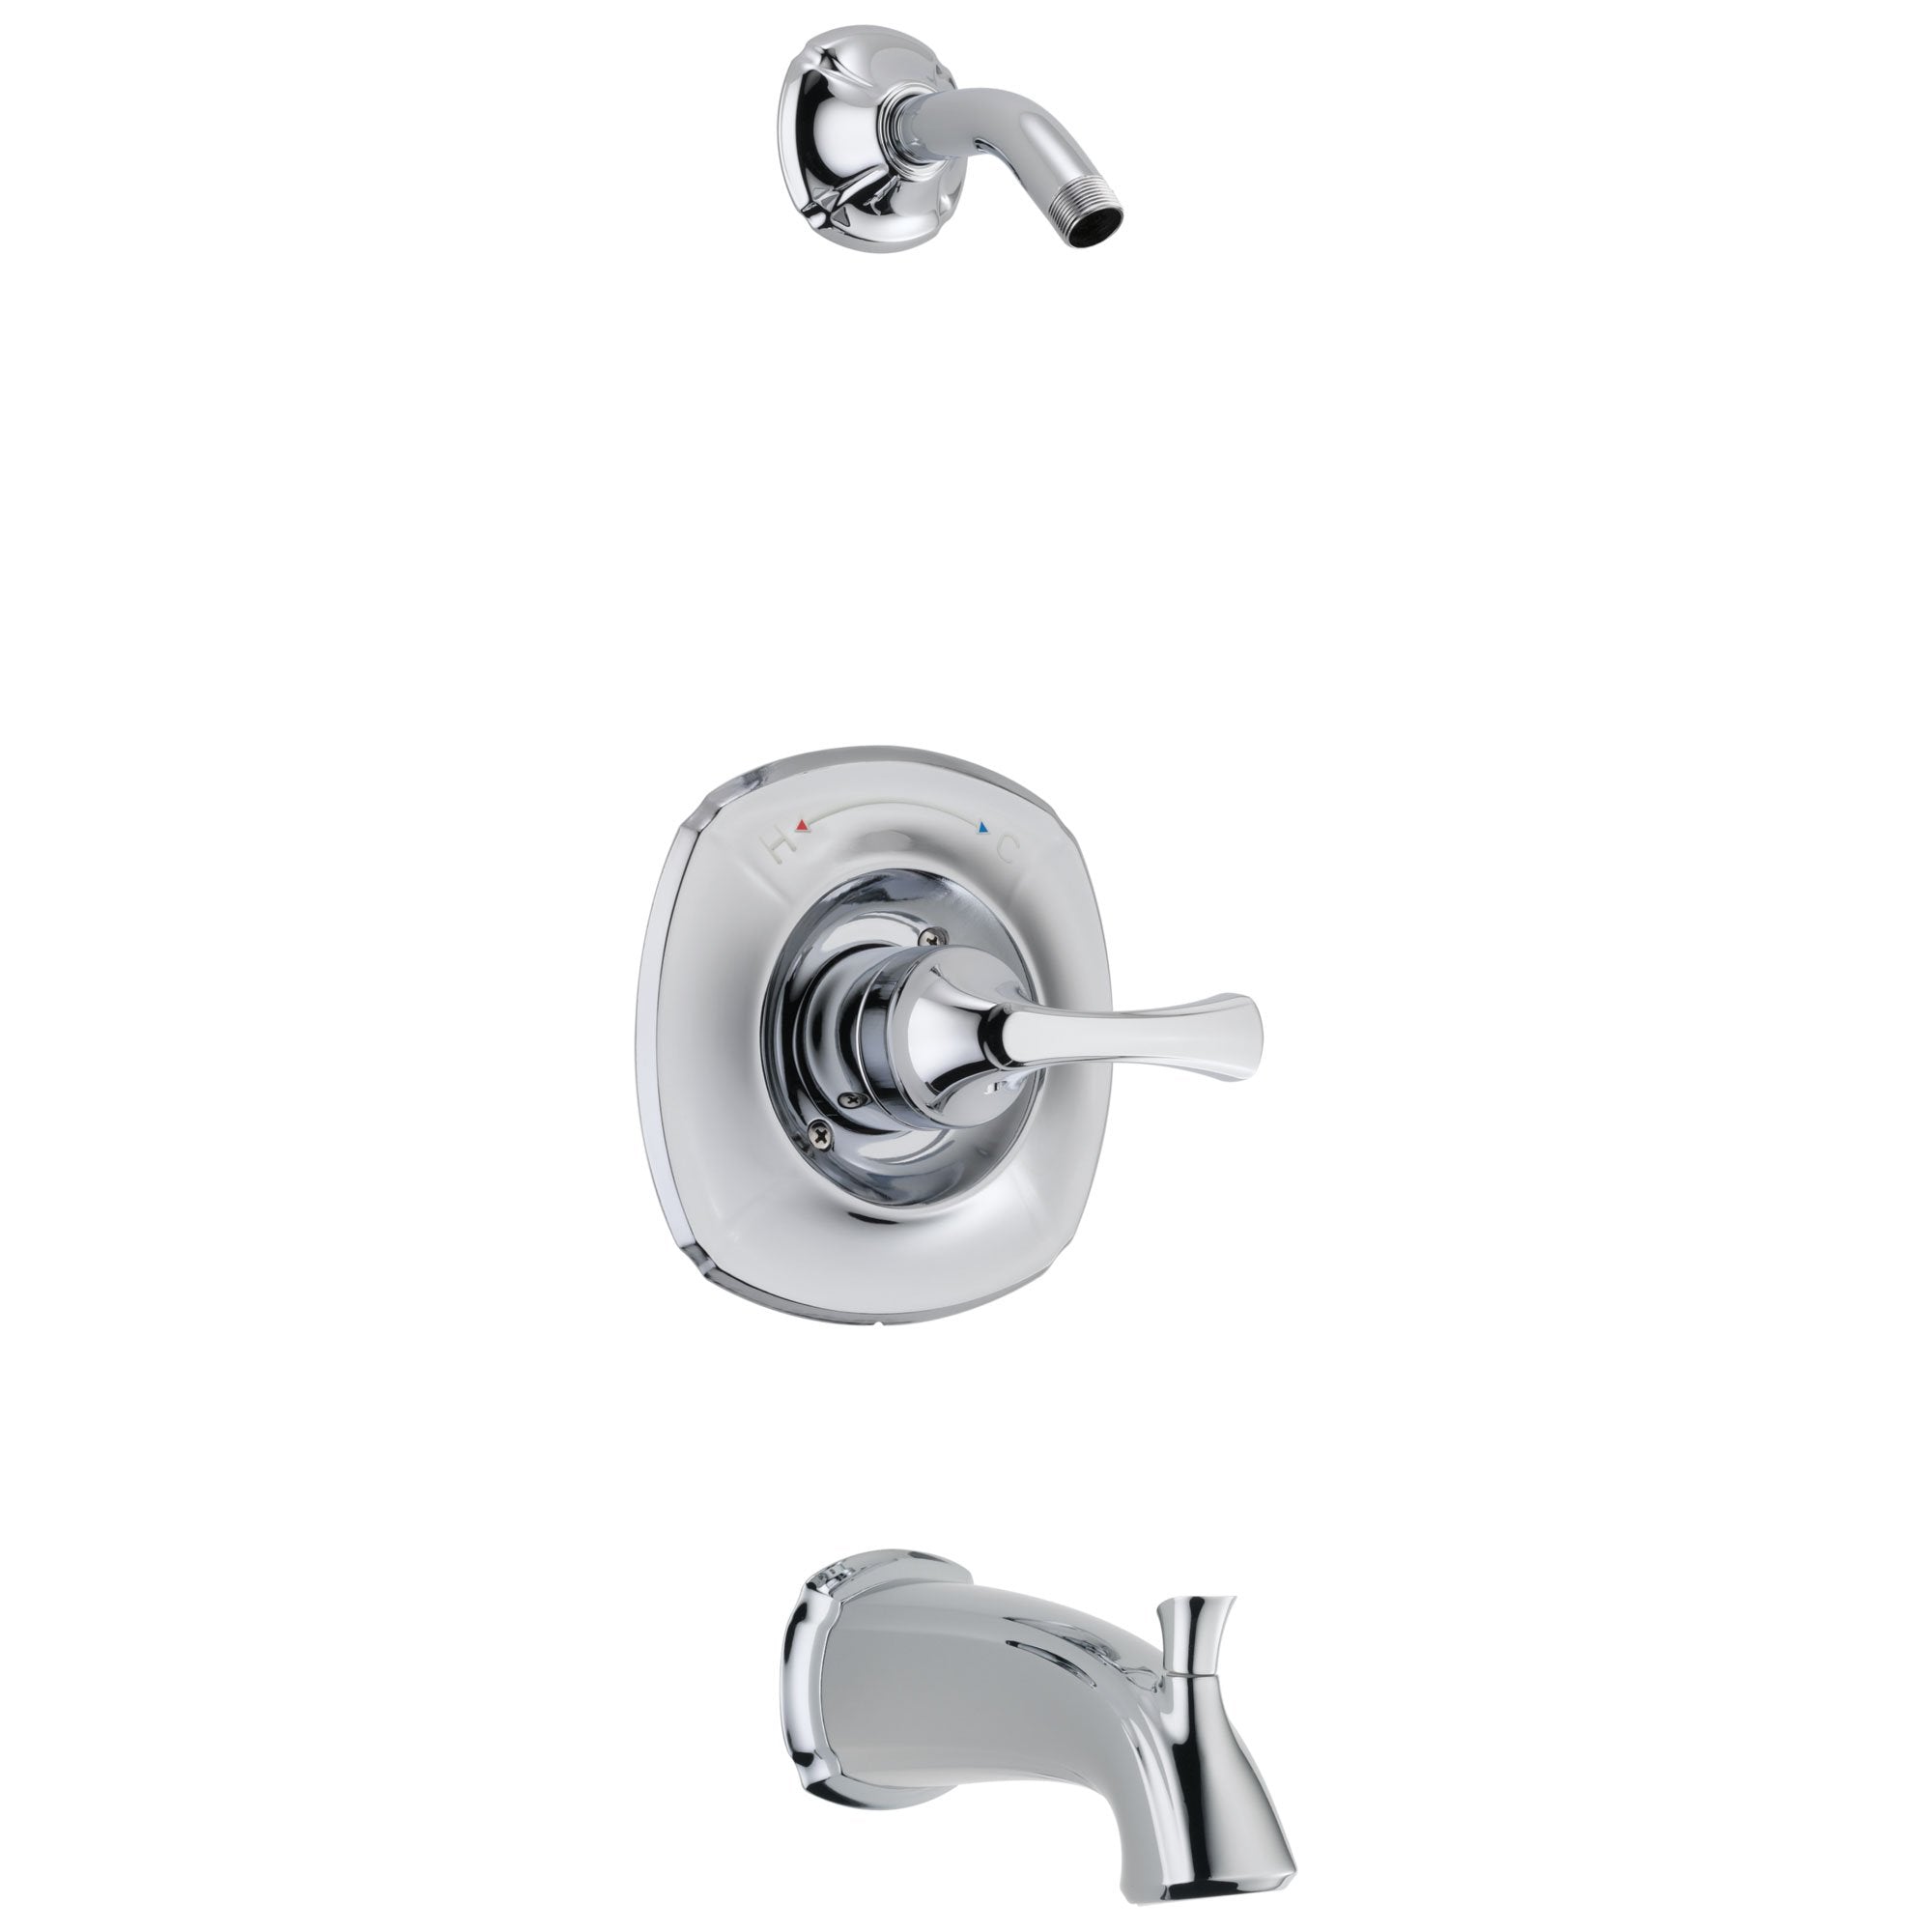 Delta Addison Collection Chrome Finish Monitor 14 Series Bath Tub and Shower Faucet - Less Showerhead Includes Trim Kit Rough Valve without Stops D2375V